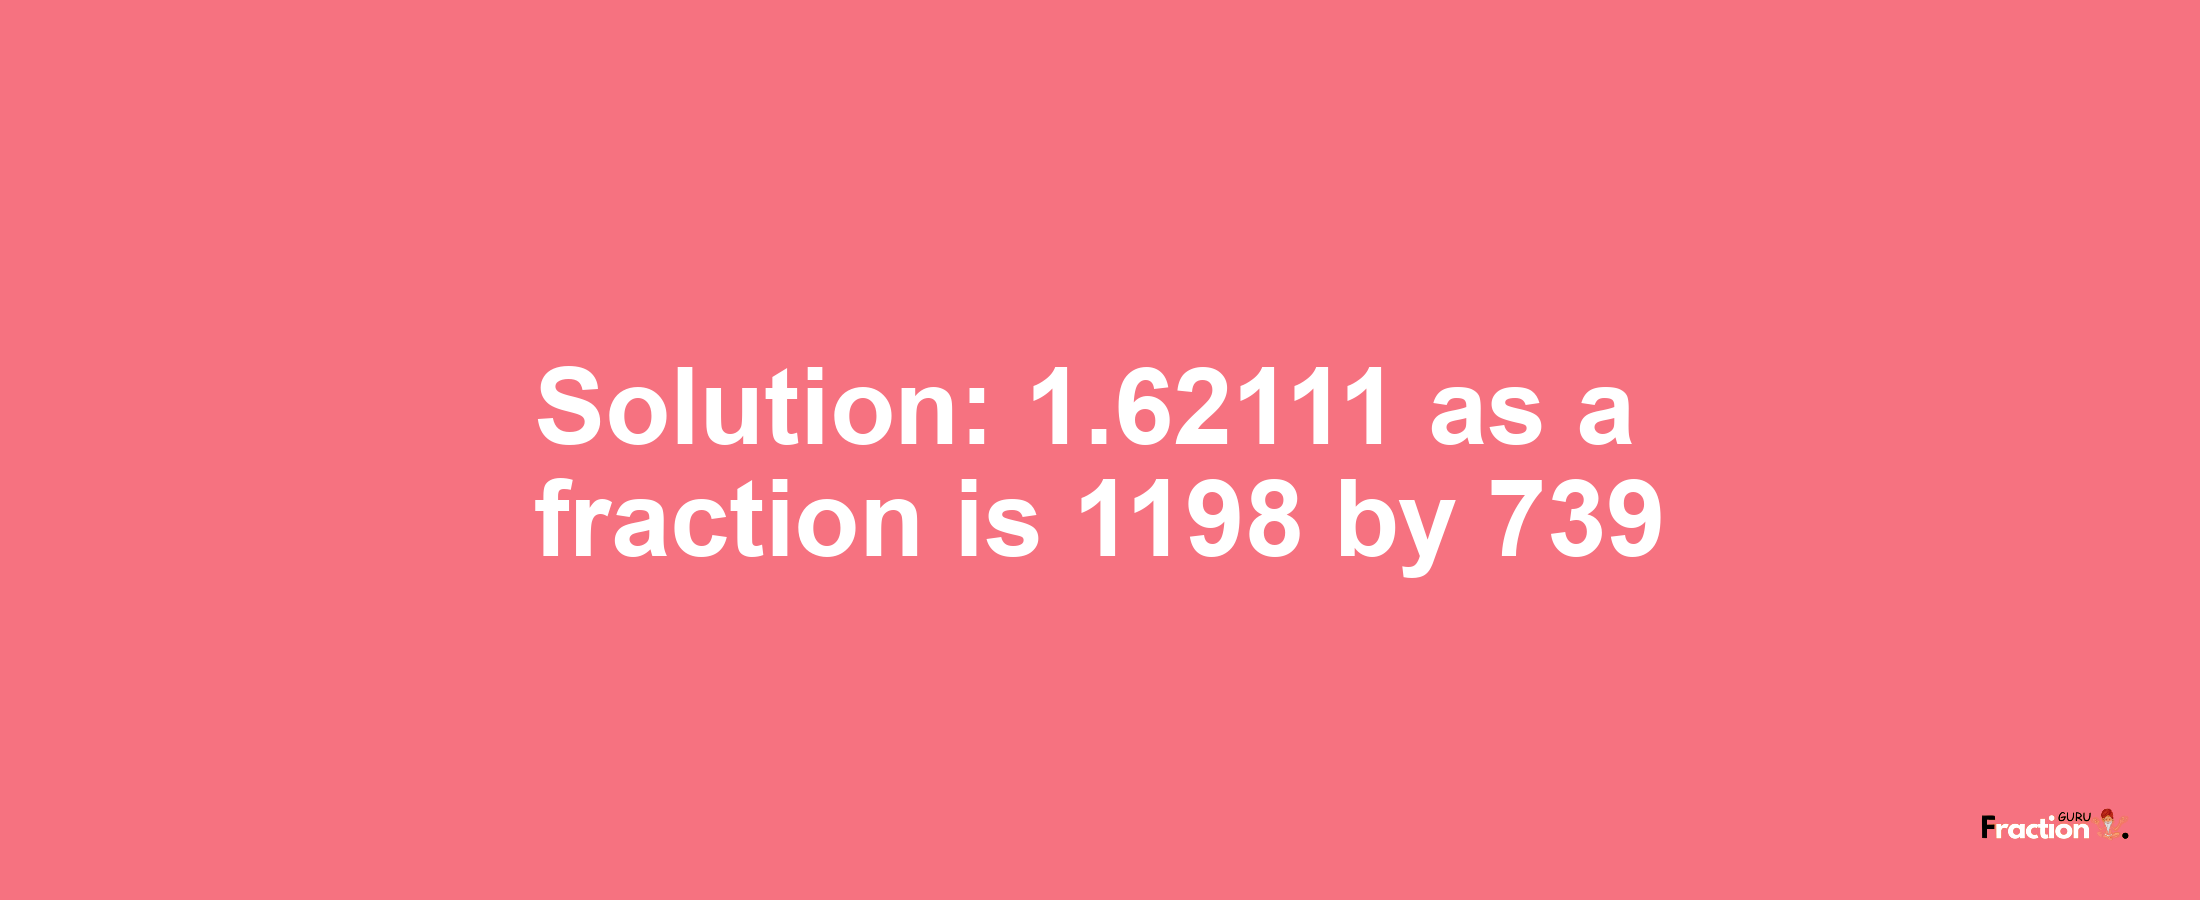 Solution:1.62111 as a fraction is 1198/739